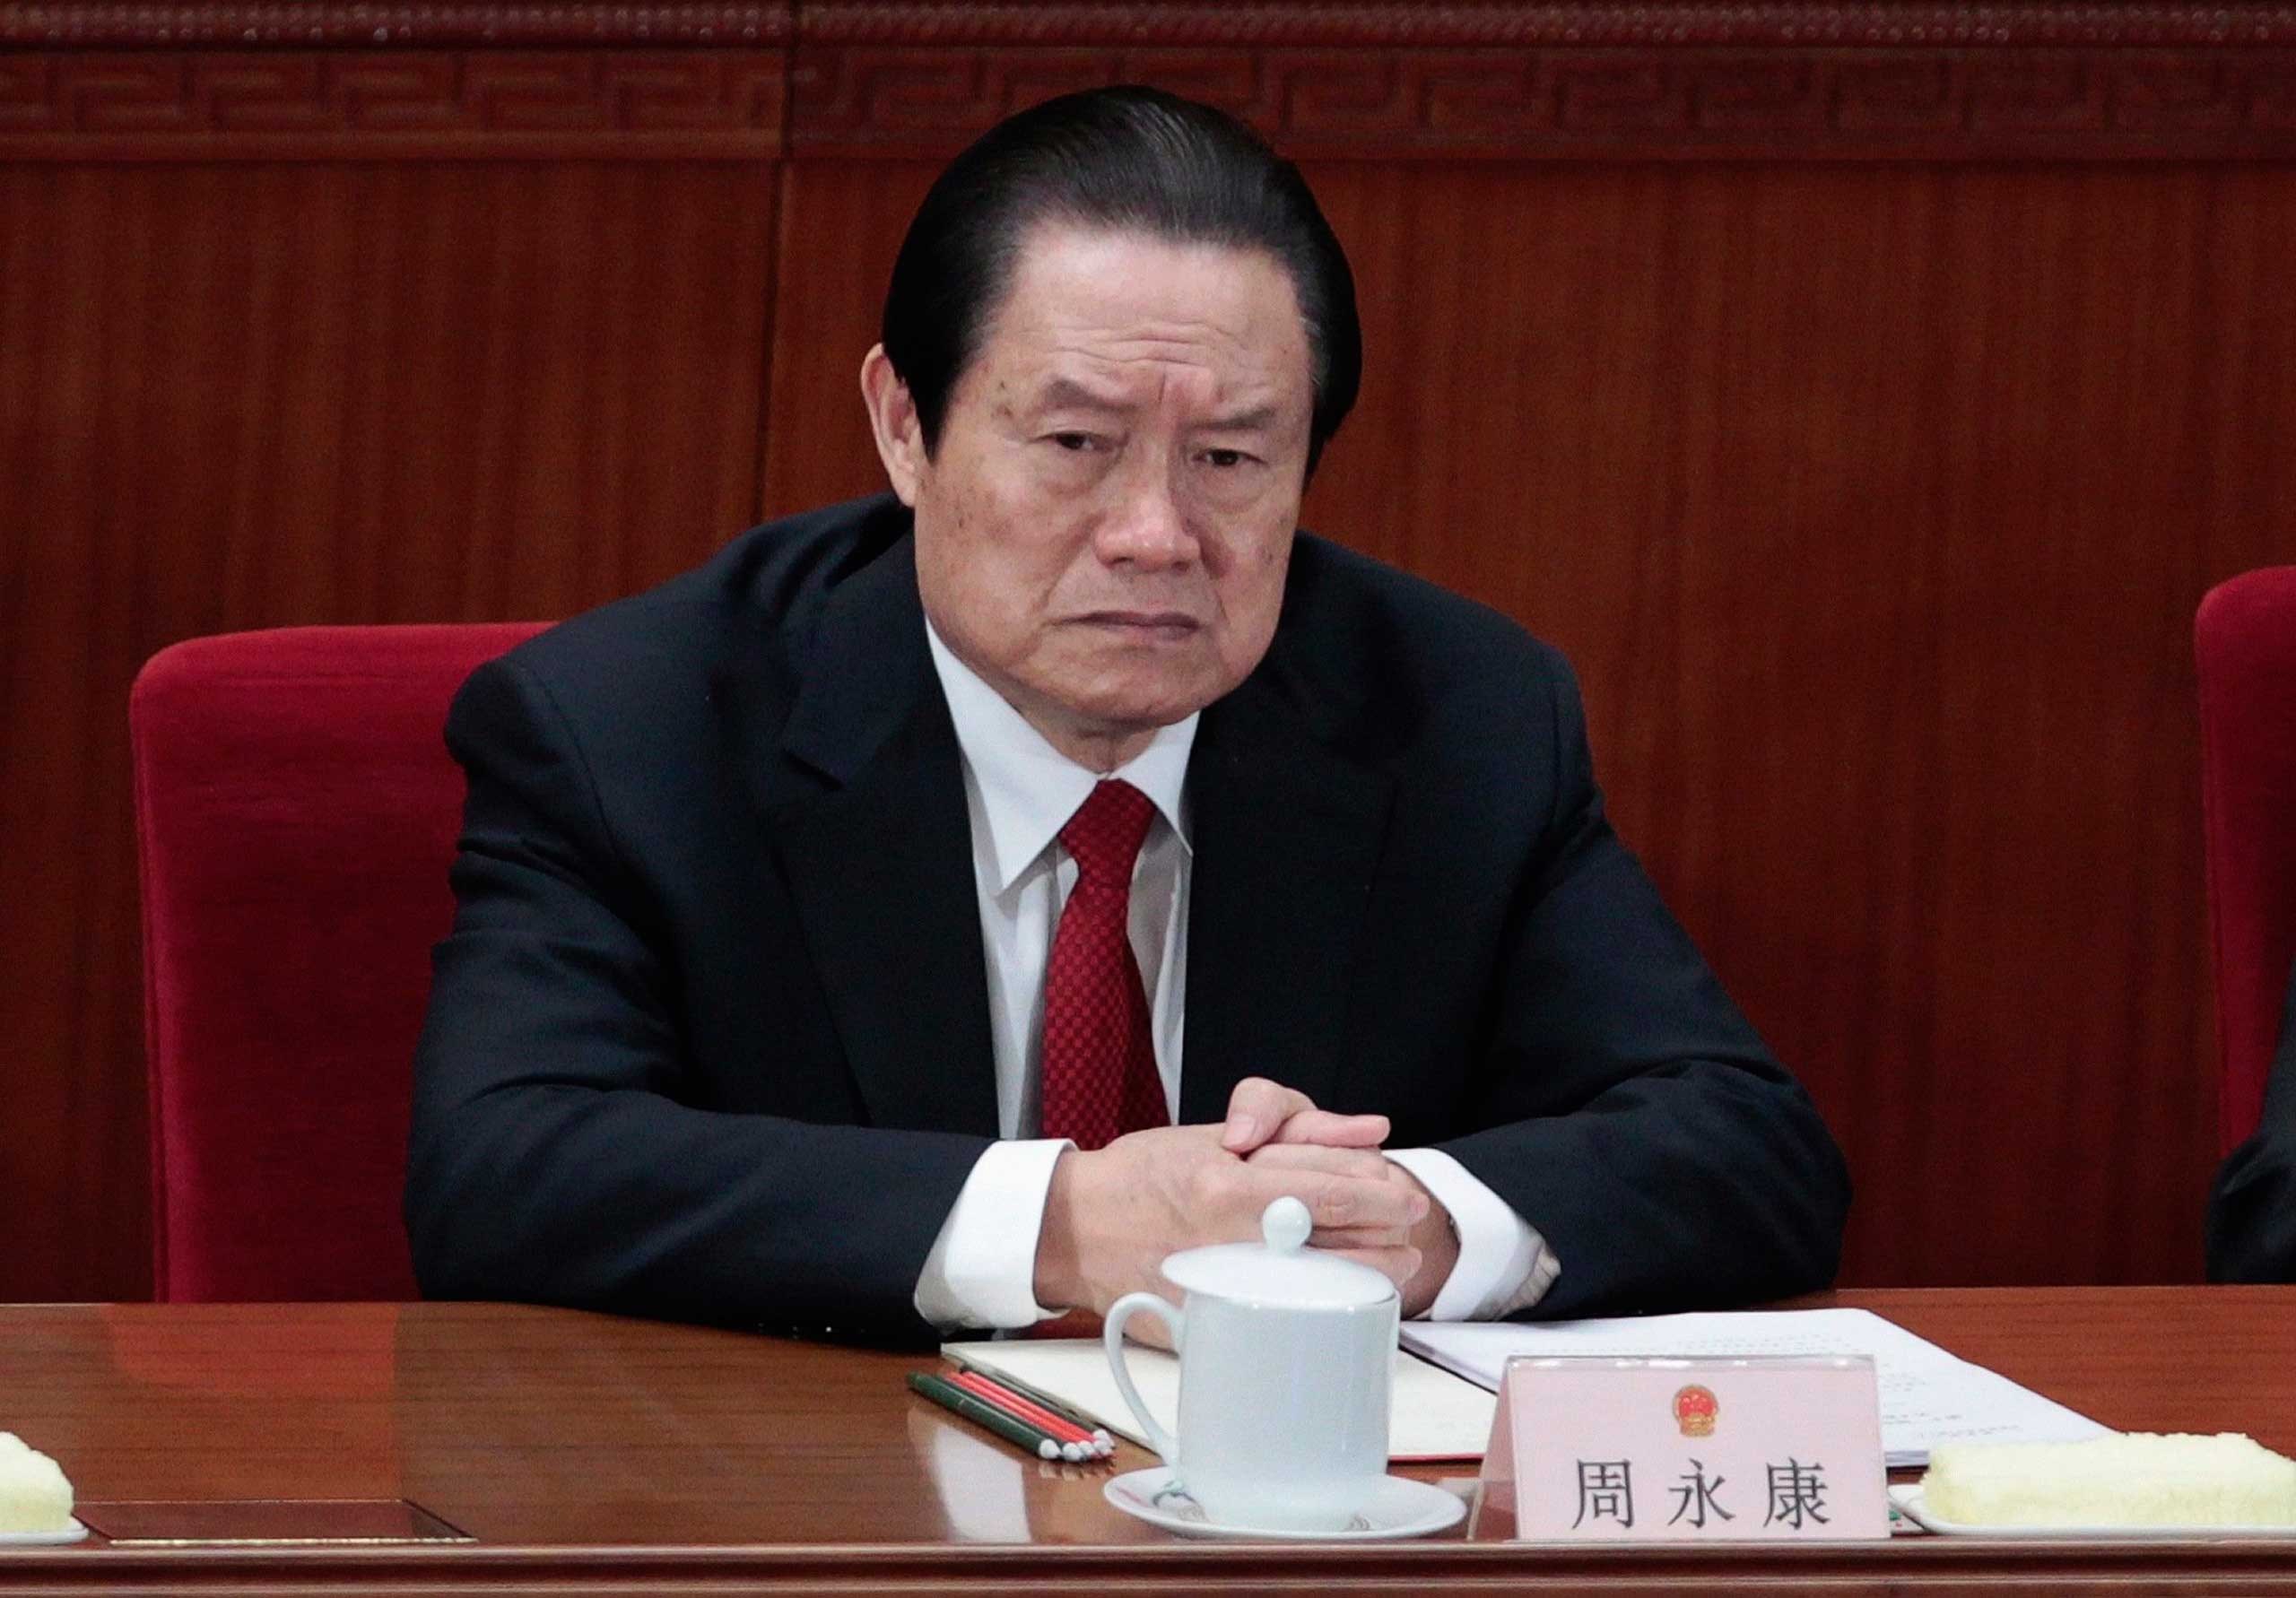 China's former Politburo Standing Committee Member Zhou Yongkang attends the closing ceremony of the National People's Congress (NPC) at the Great Hall of the People in Beijing, March 14, 2012. (Jason Lee—Reuters)